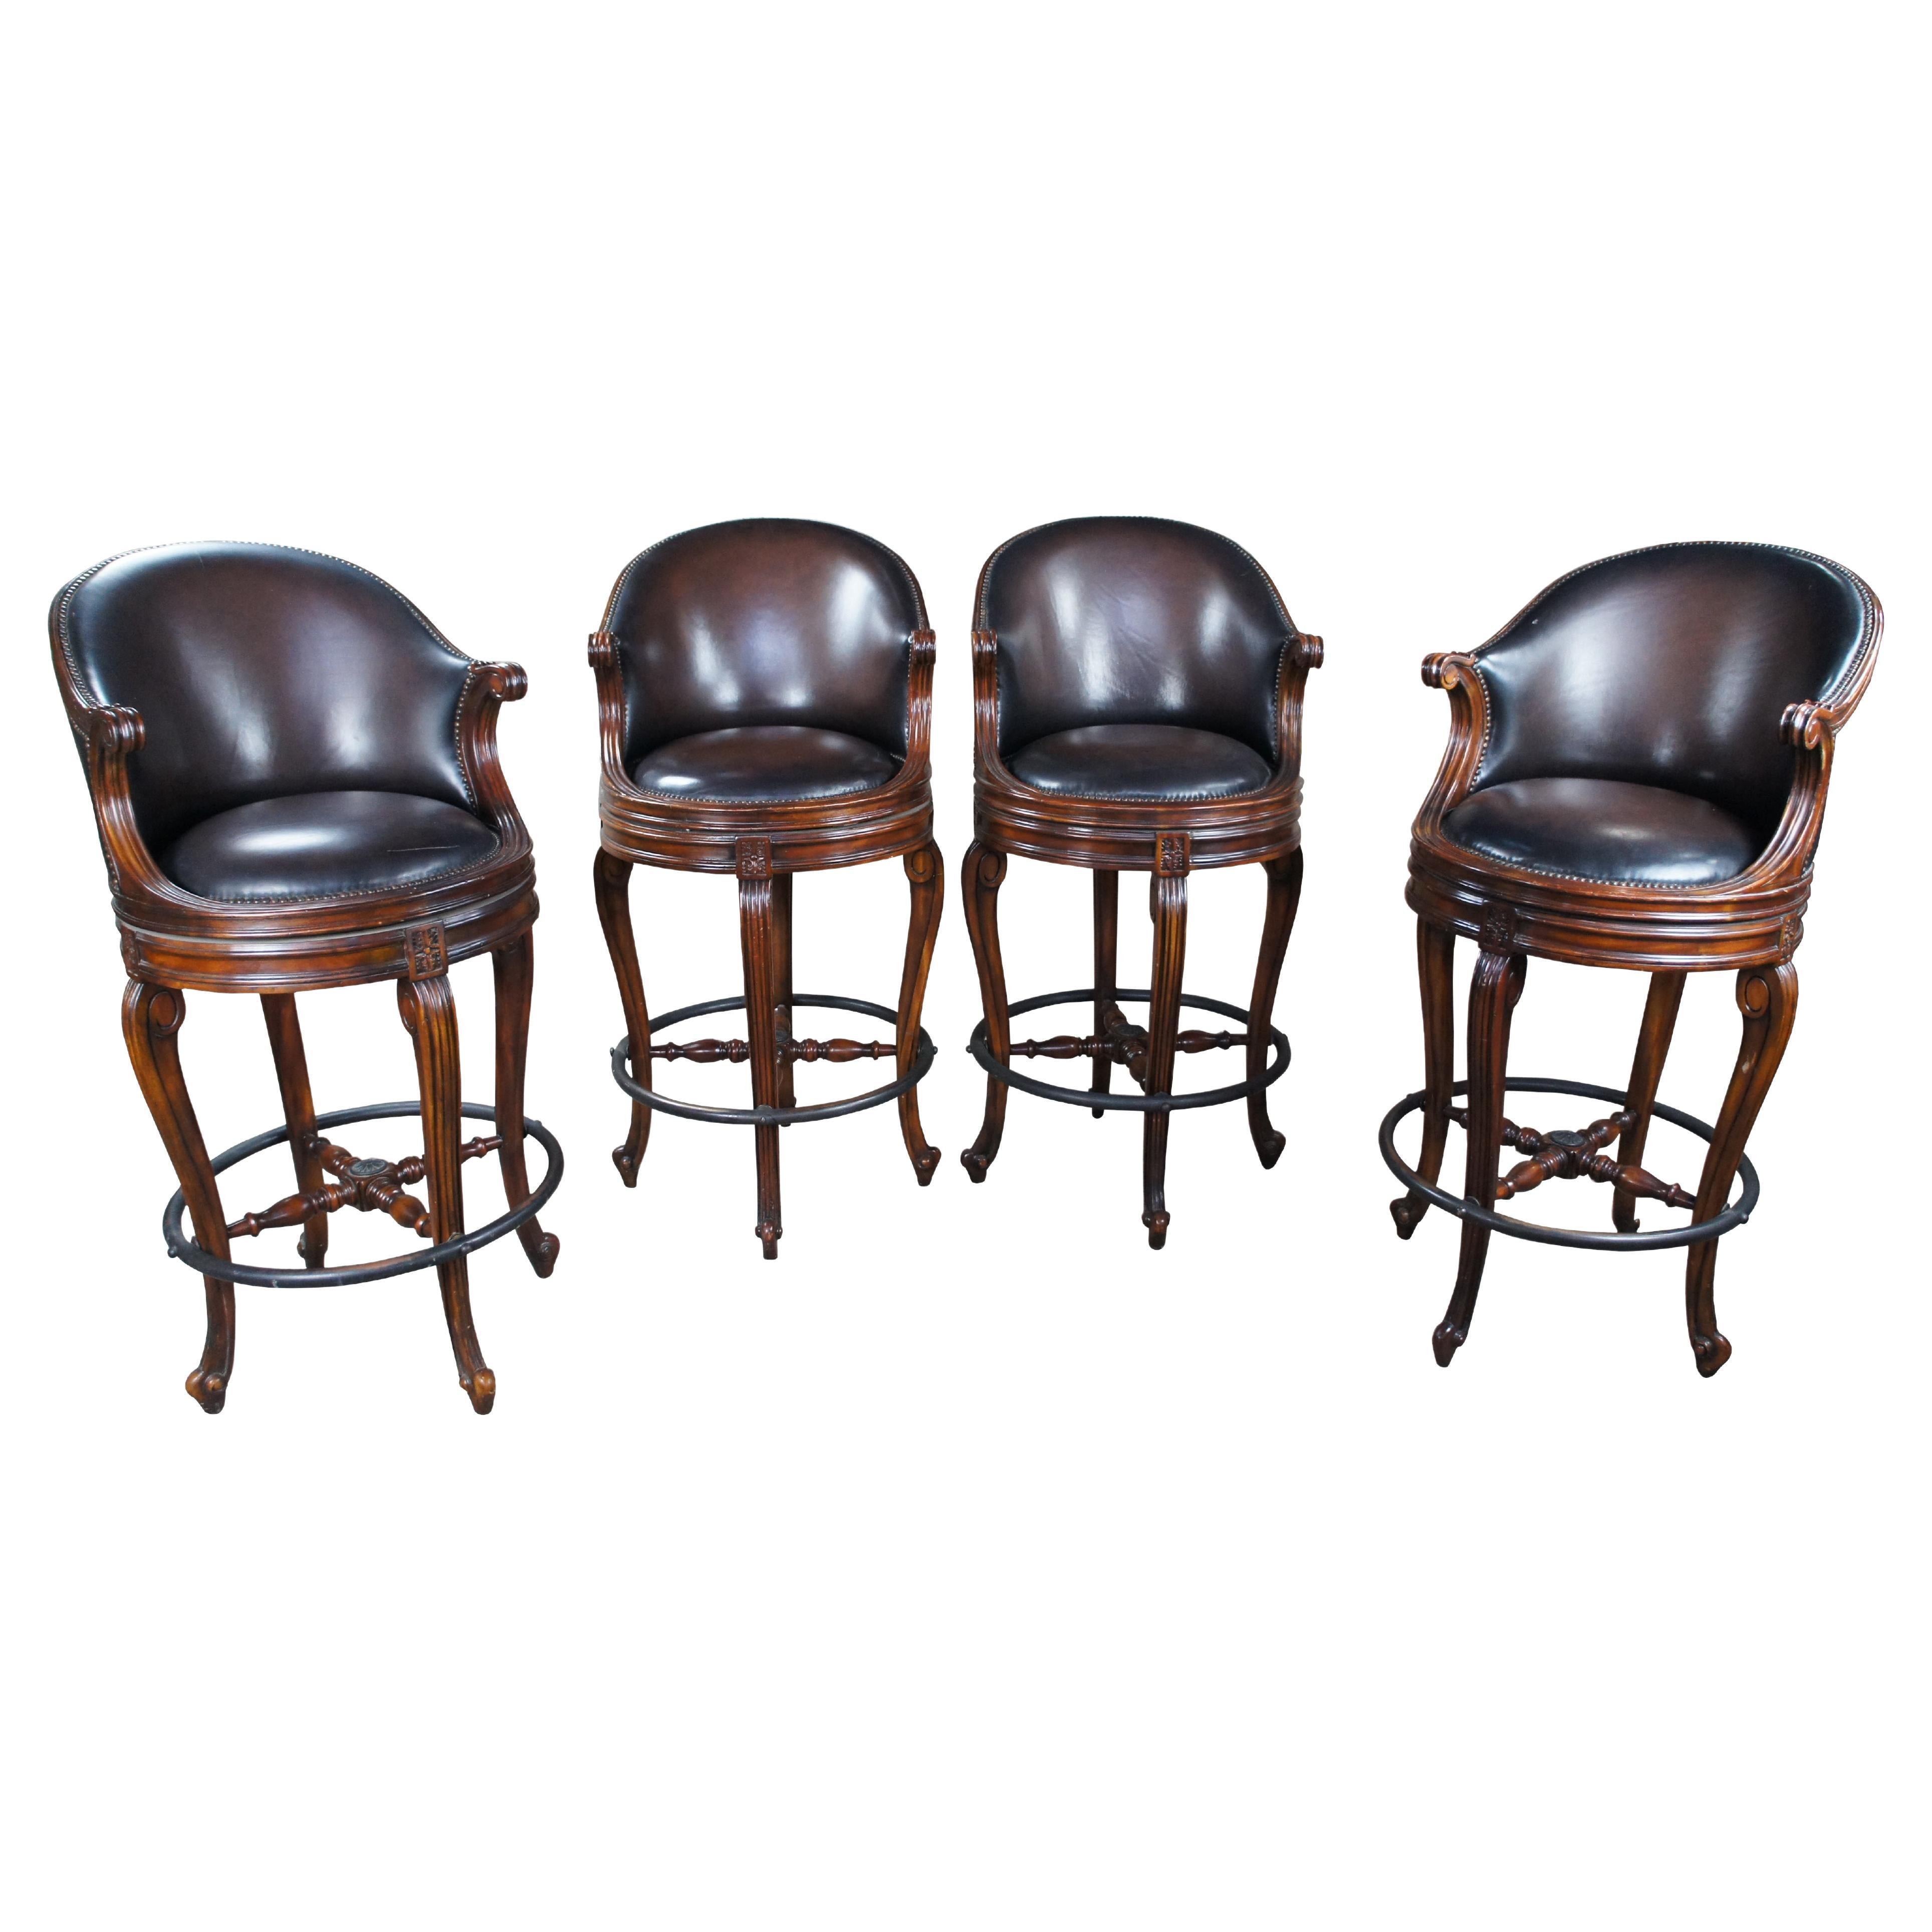 4 Theodore Alexander Napoleon III Mahogany Scoop Back Brown Leather Bar Stool For Sale